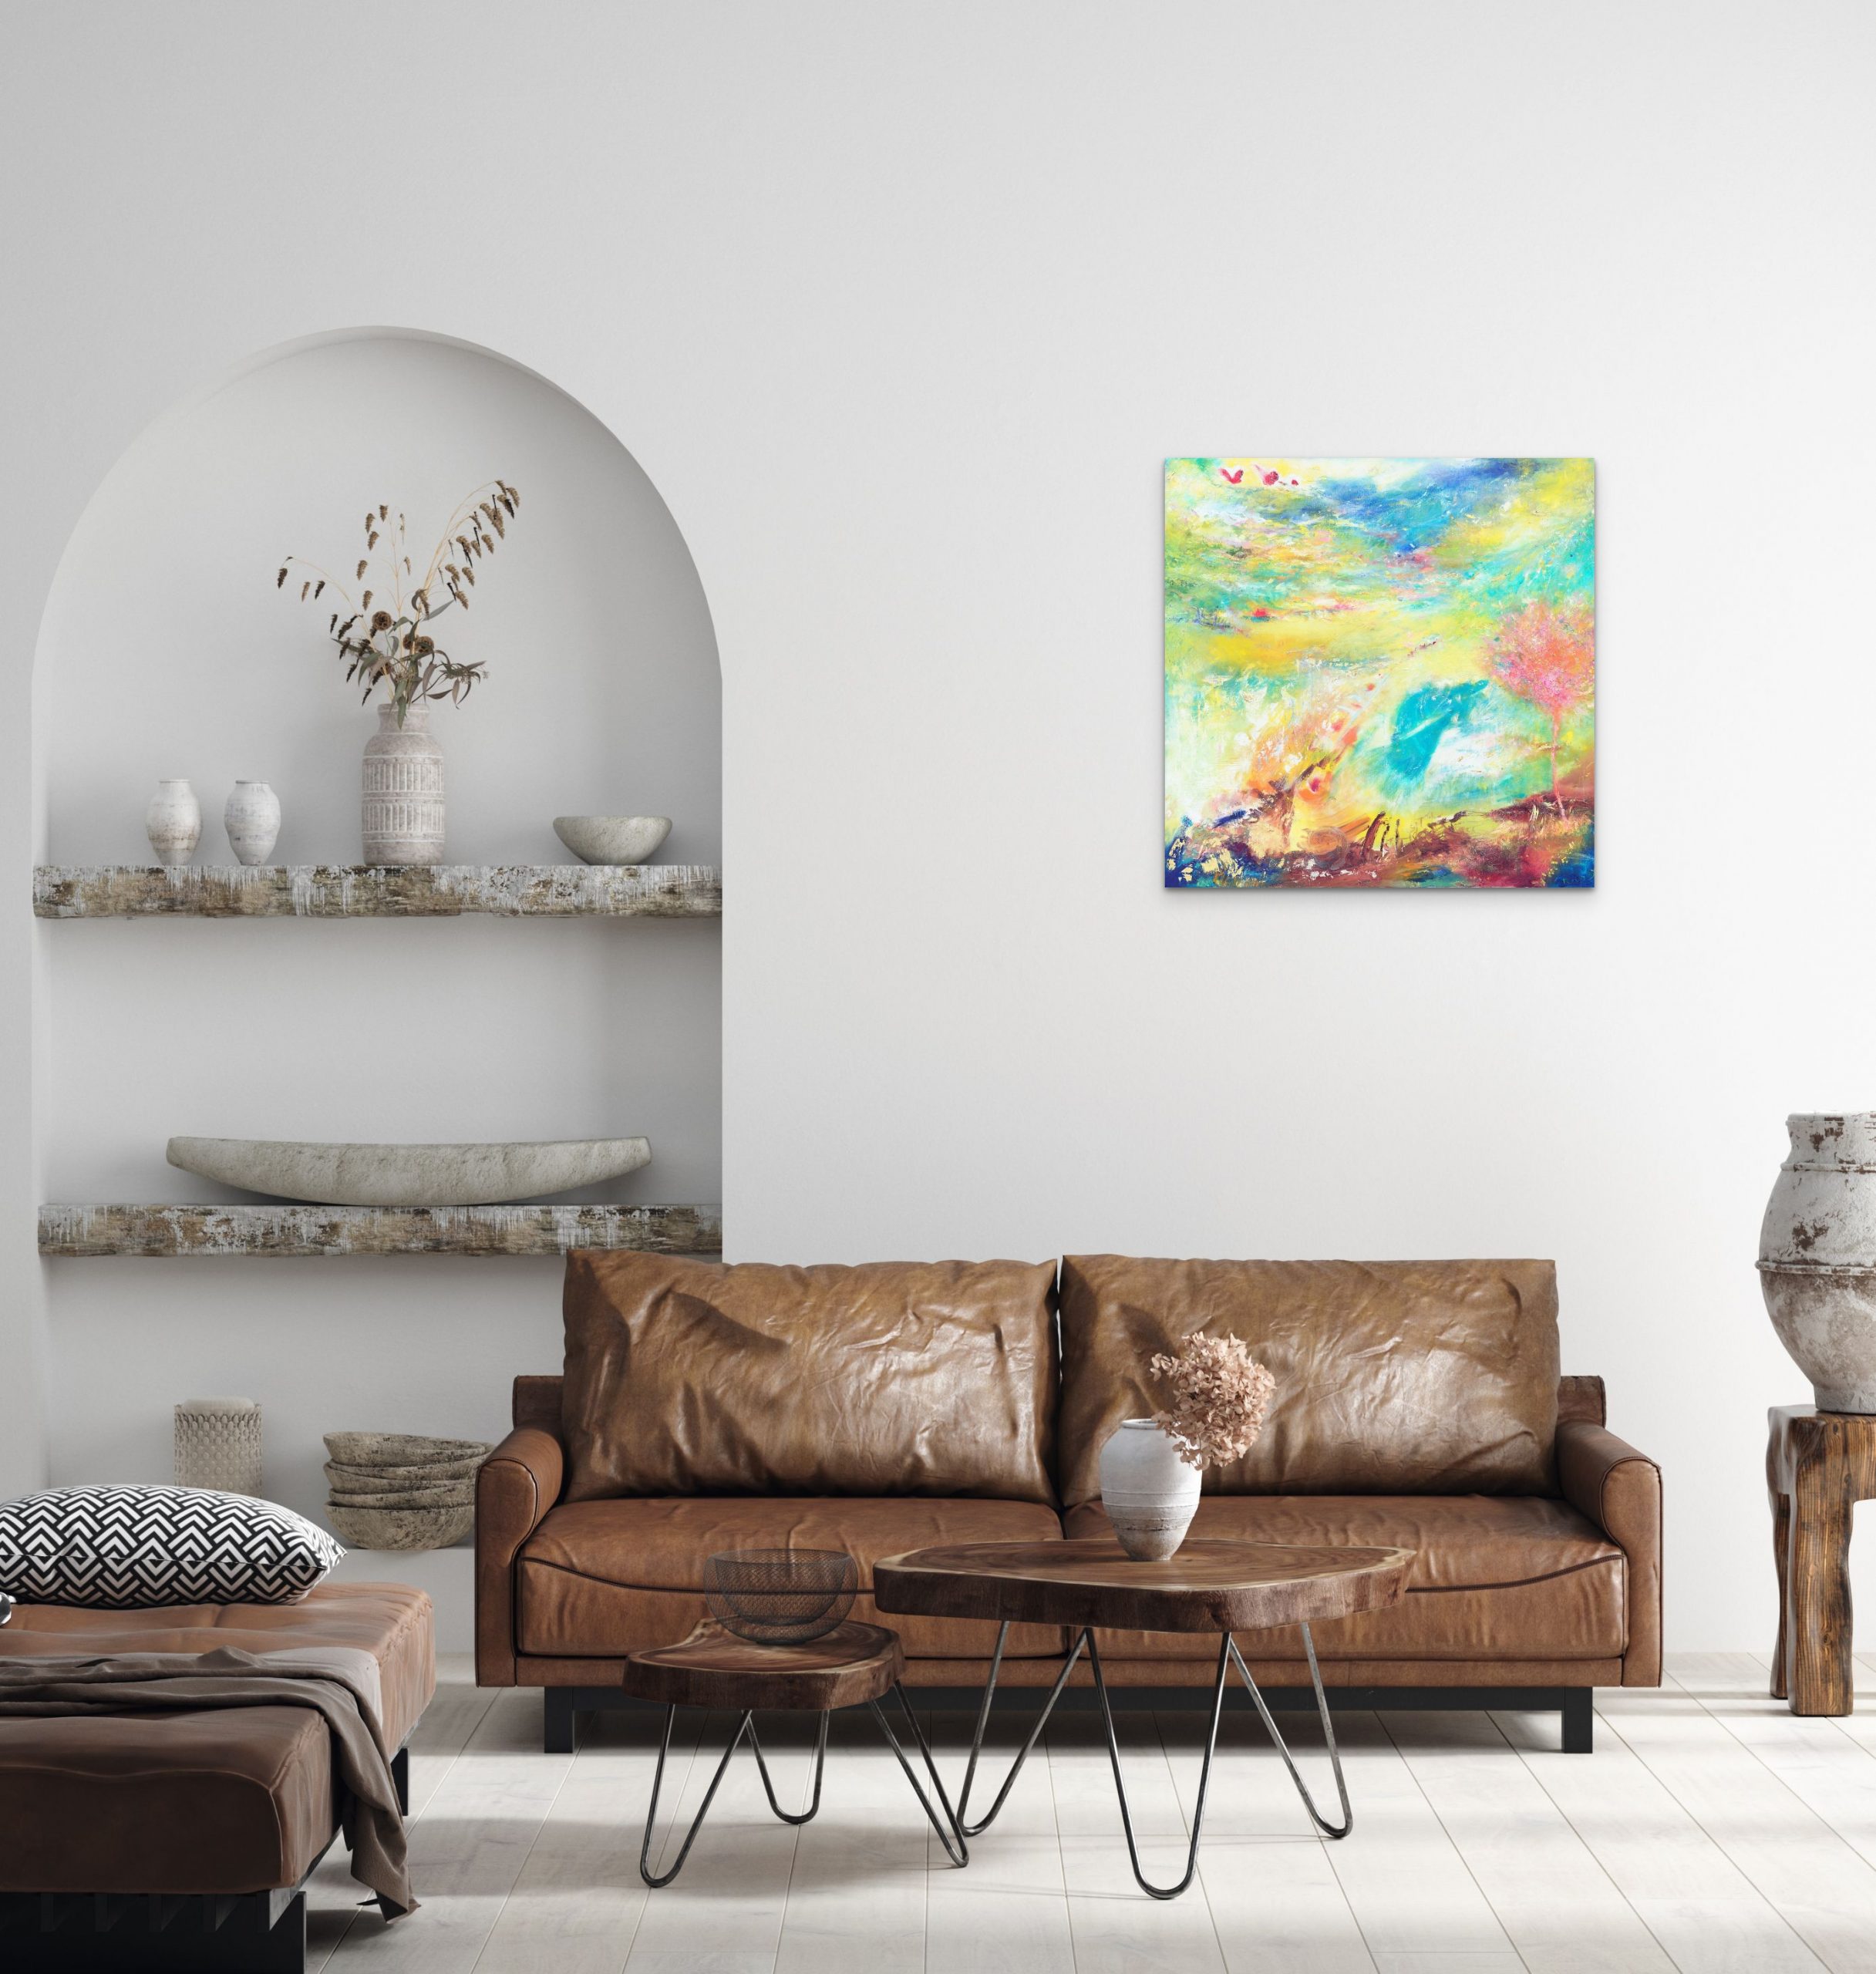 The Resurrection abstract art in the home above sofa a painting in oil on canvas of the journey heavenward an angel guides the lone traveller